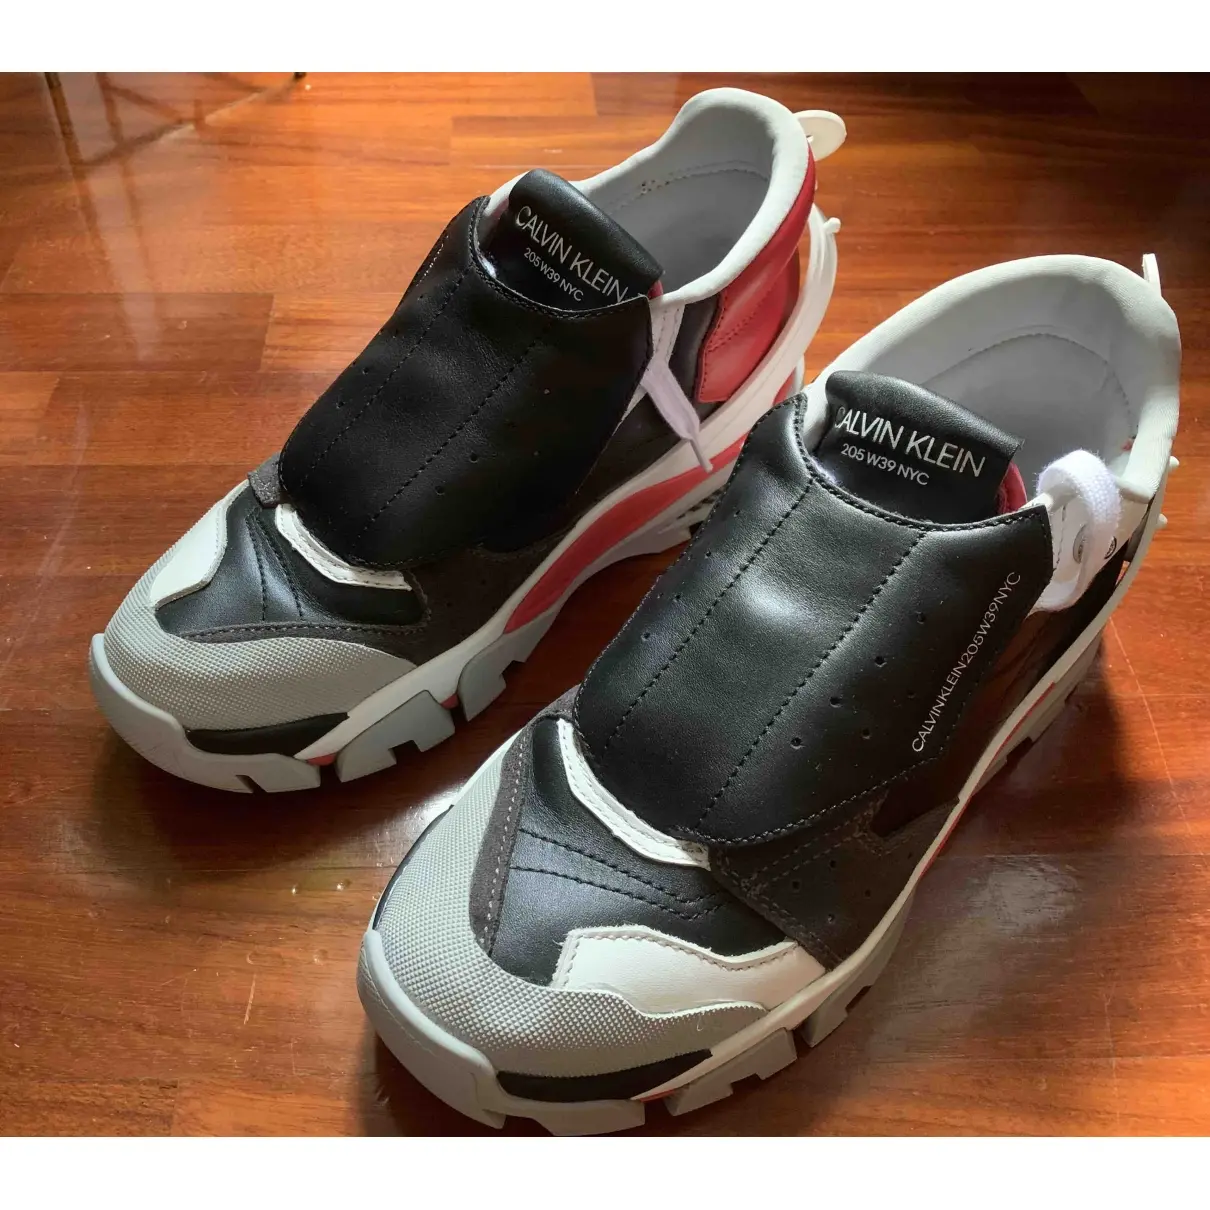 Calvin Klein 205W39NYC Carlos 10 leather trainers for sale